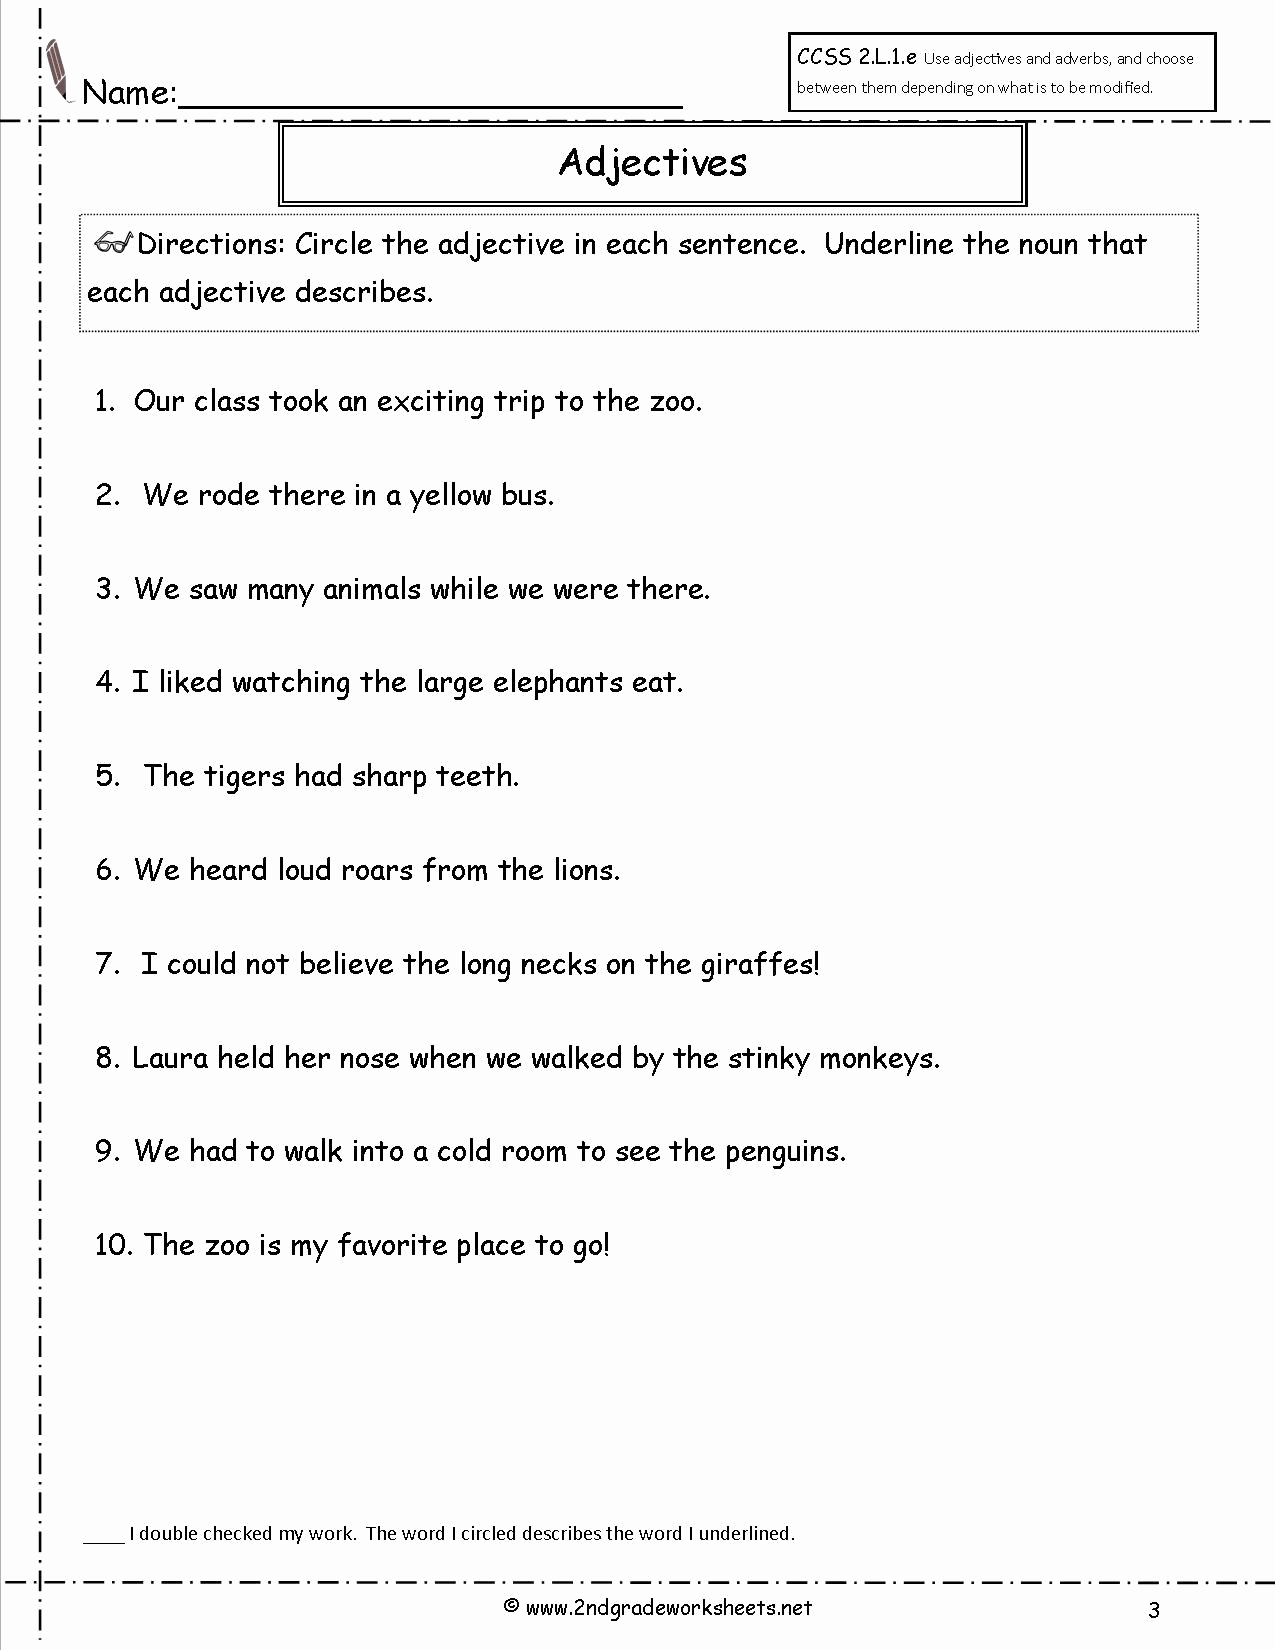 3rd Grade Adjectives Worksheets Best Of Adjectives Worksheets for Grade 3 with Answers Pdf